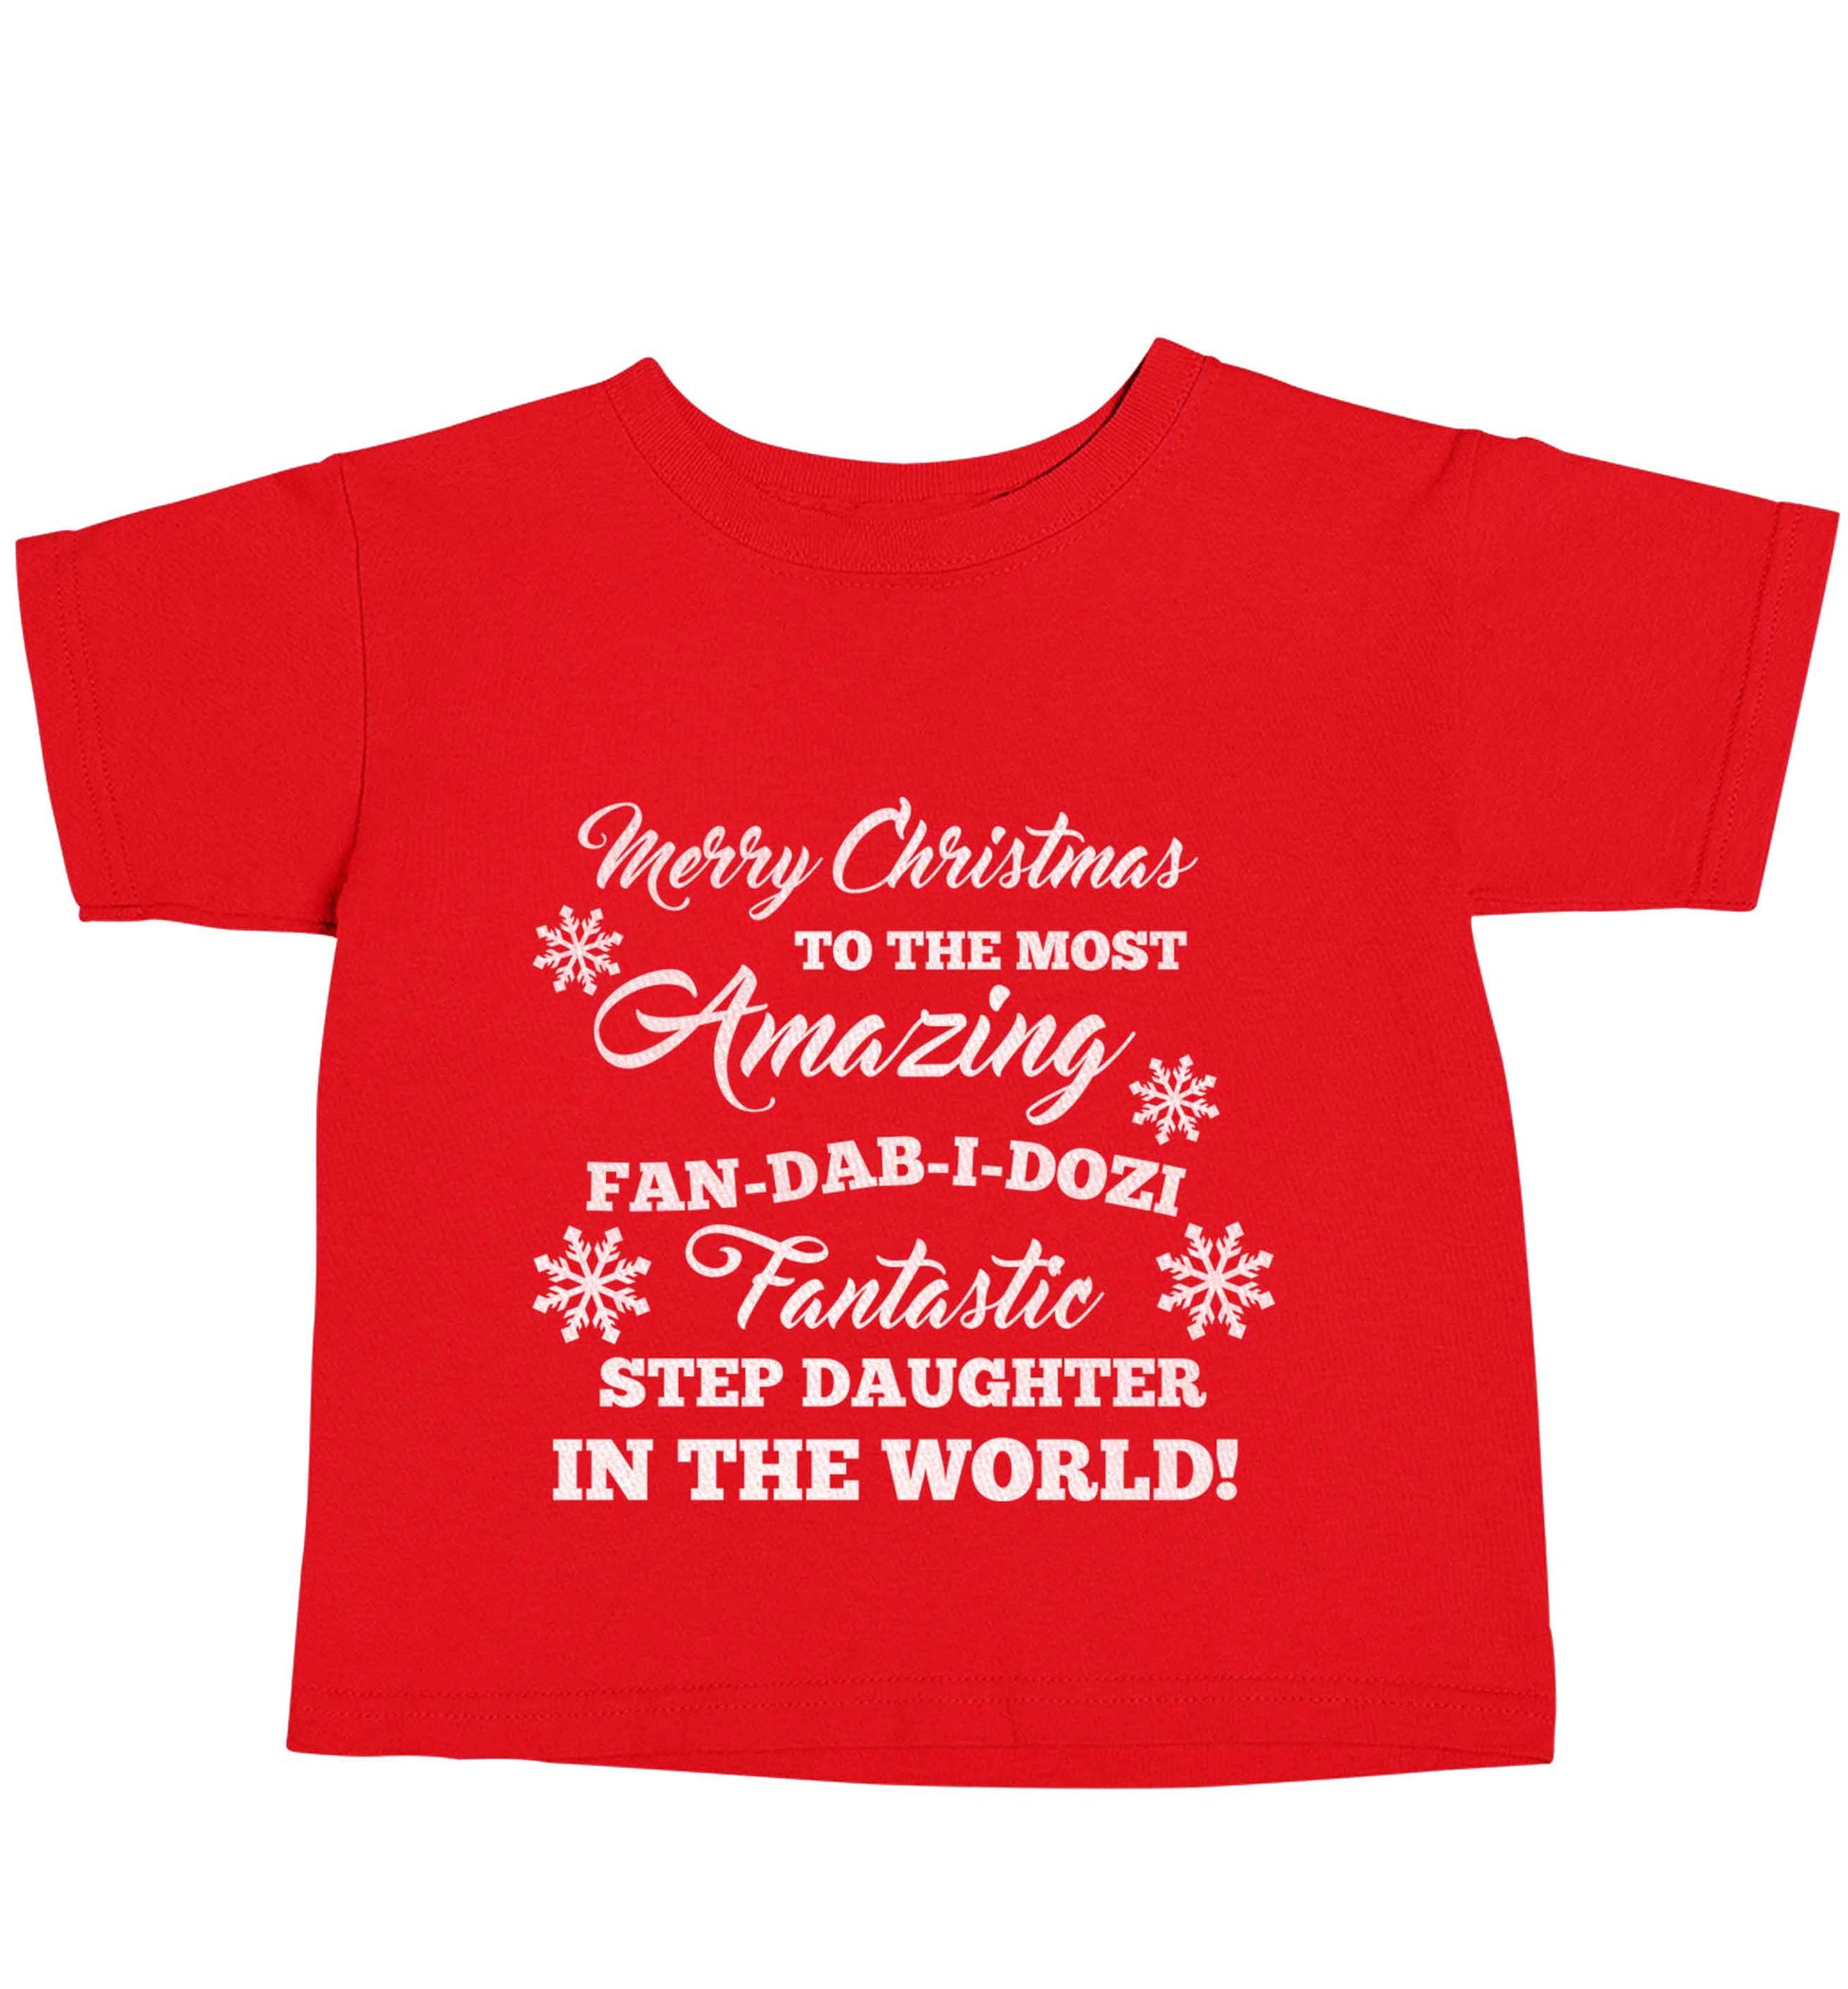 Merry Christmas to the most amazing fan-dab-i-dozi fantasic Step Daughter in the world red baby toddler Tshirt 2 Years